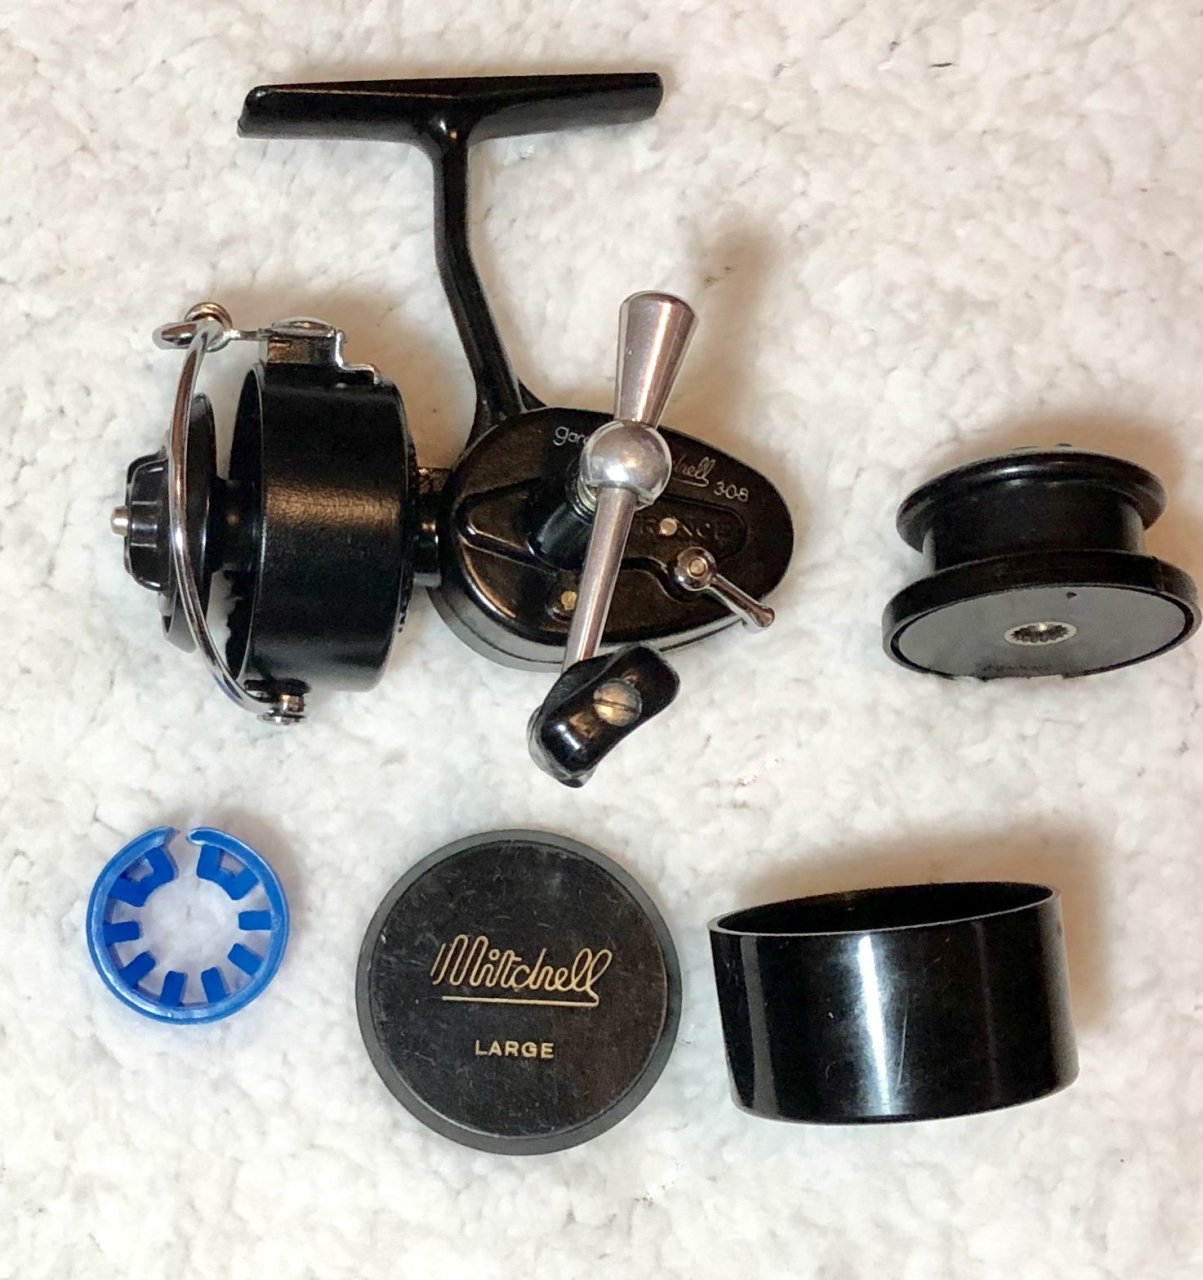 Read Details about   Garcia Mitchell 3000 Spinning Fishing Reel 1:4.4 Ratio 